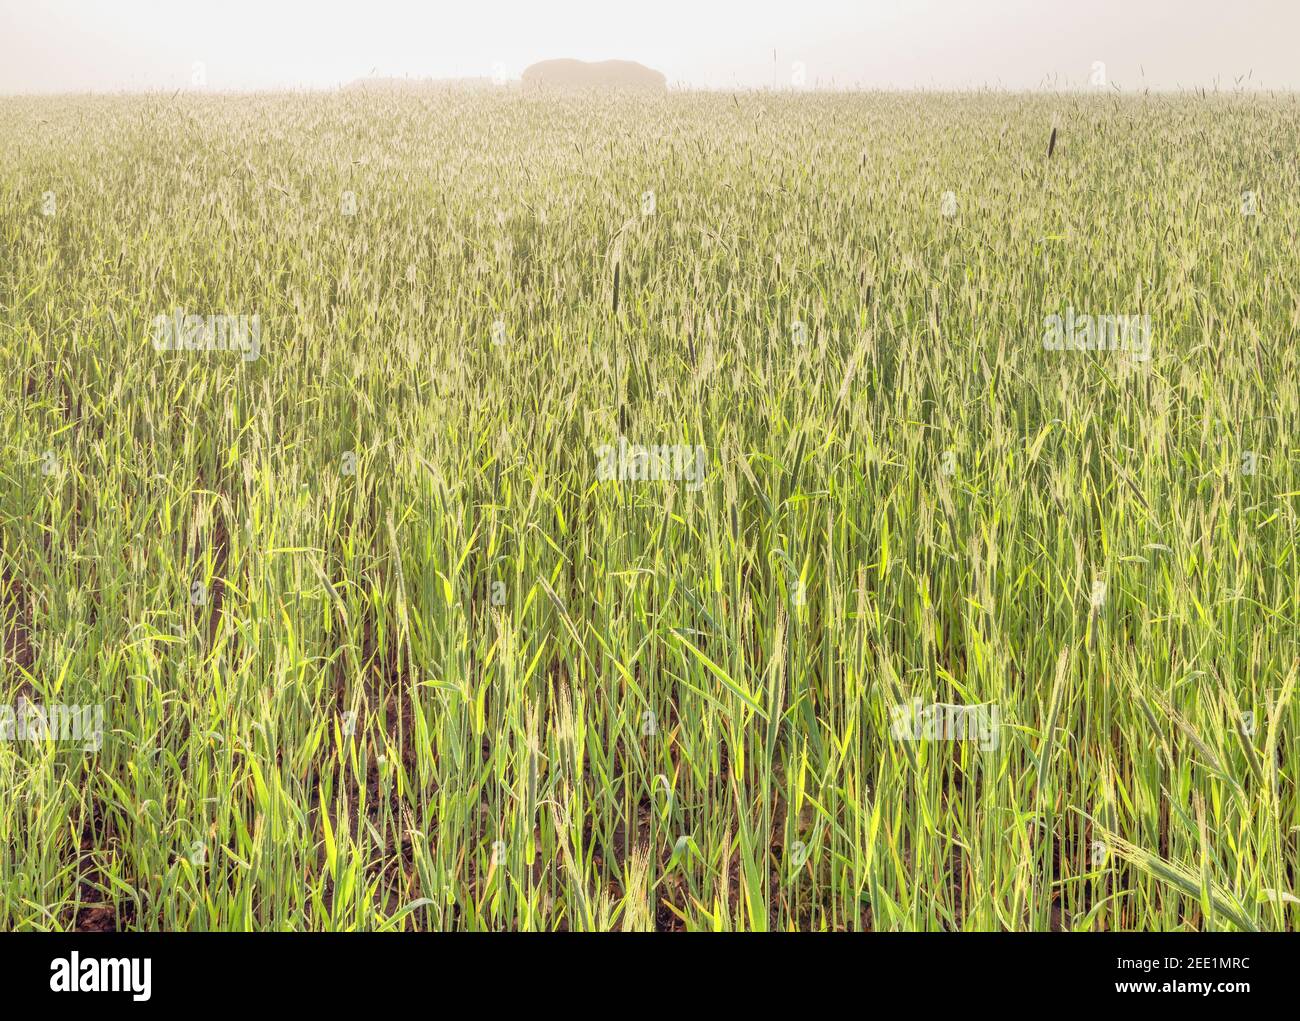 Foggy May morning. Wheat field with dew drops. Stock Photo